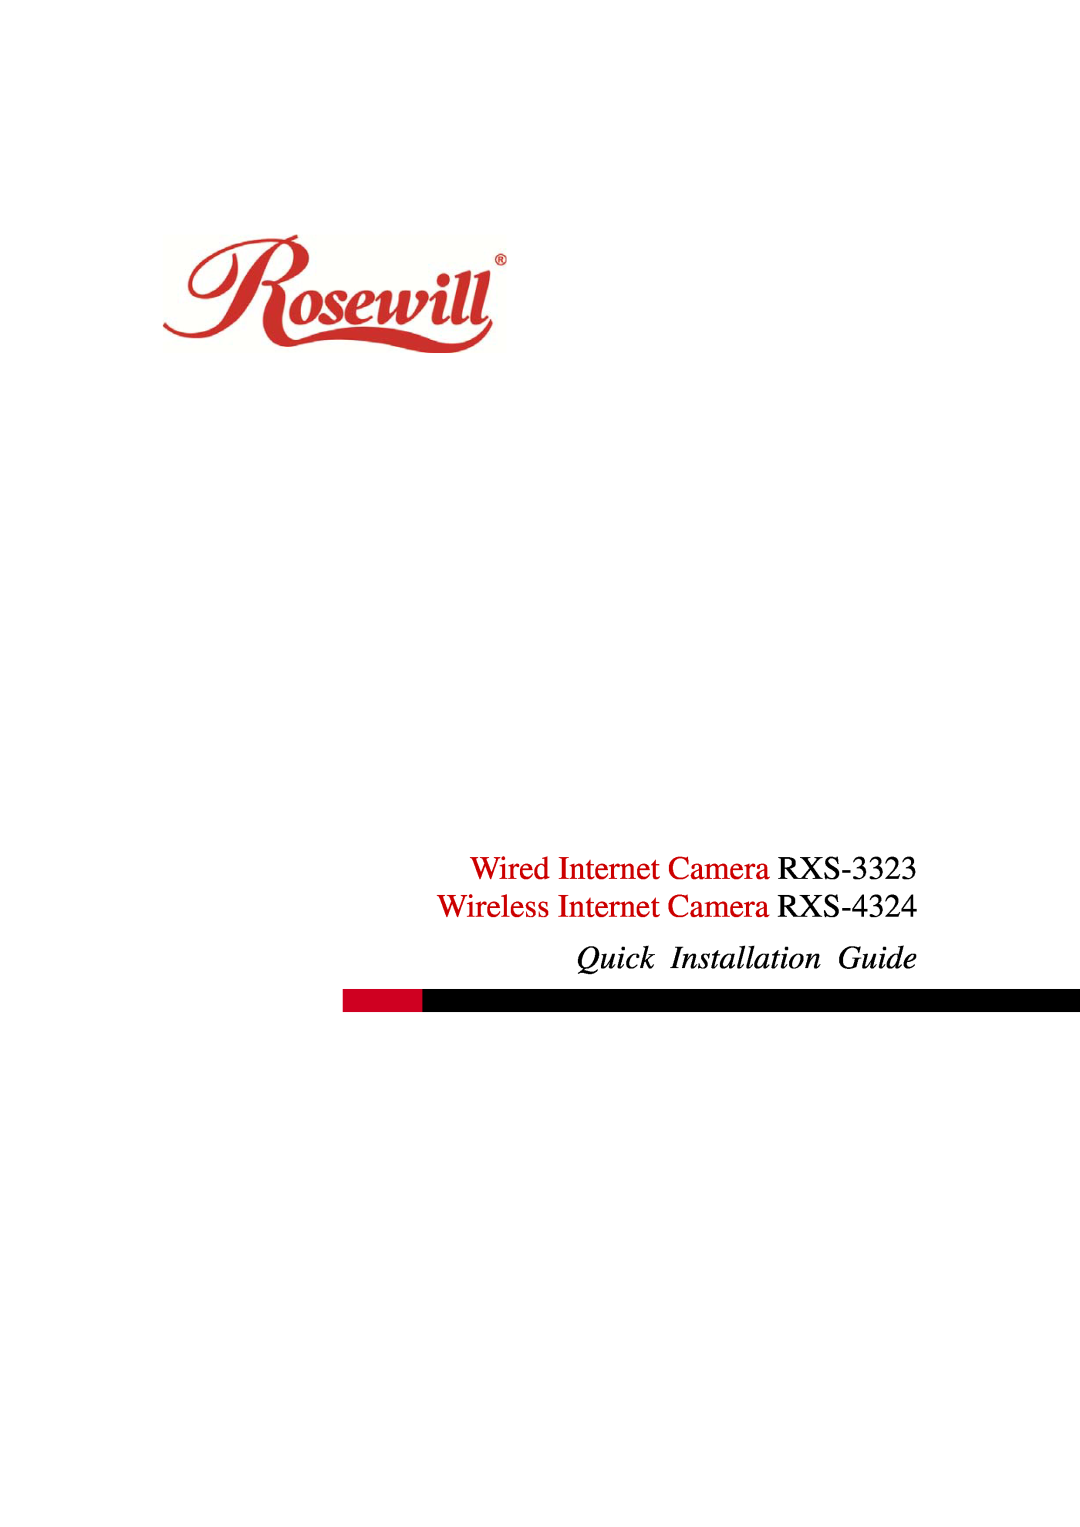 Rosewill user manual Wired Internet Camera RXS-3323 Wireless Internet Camera RXS-4324, User Manual 